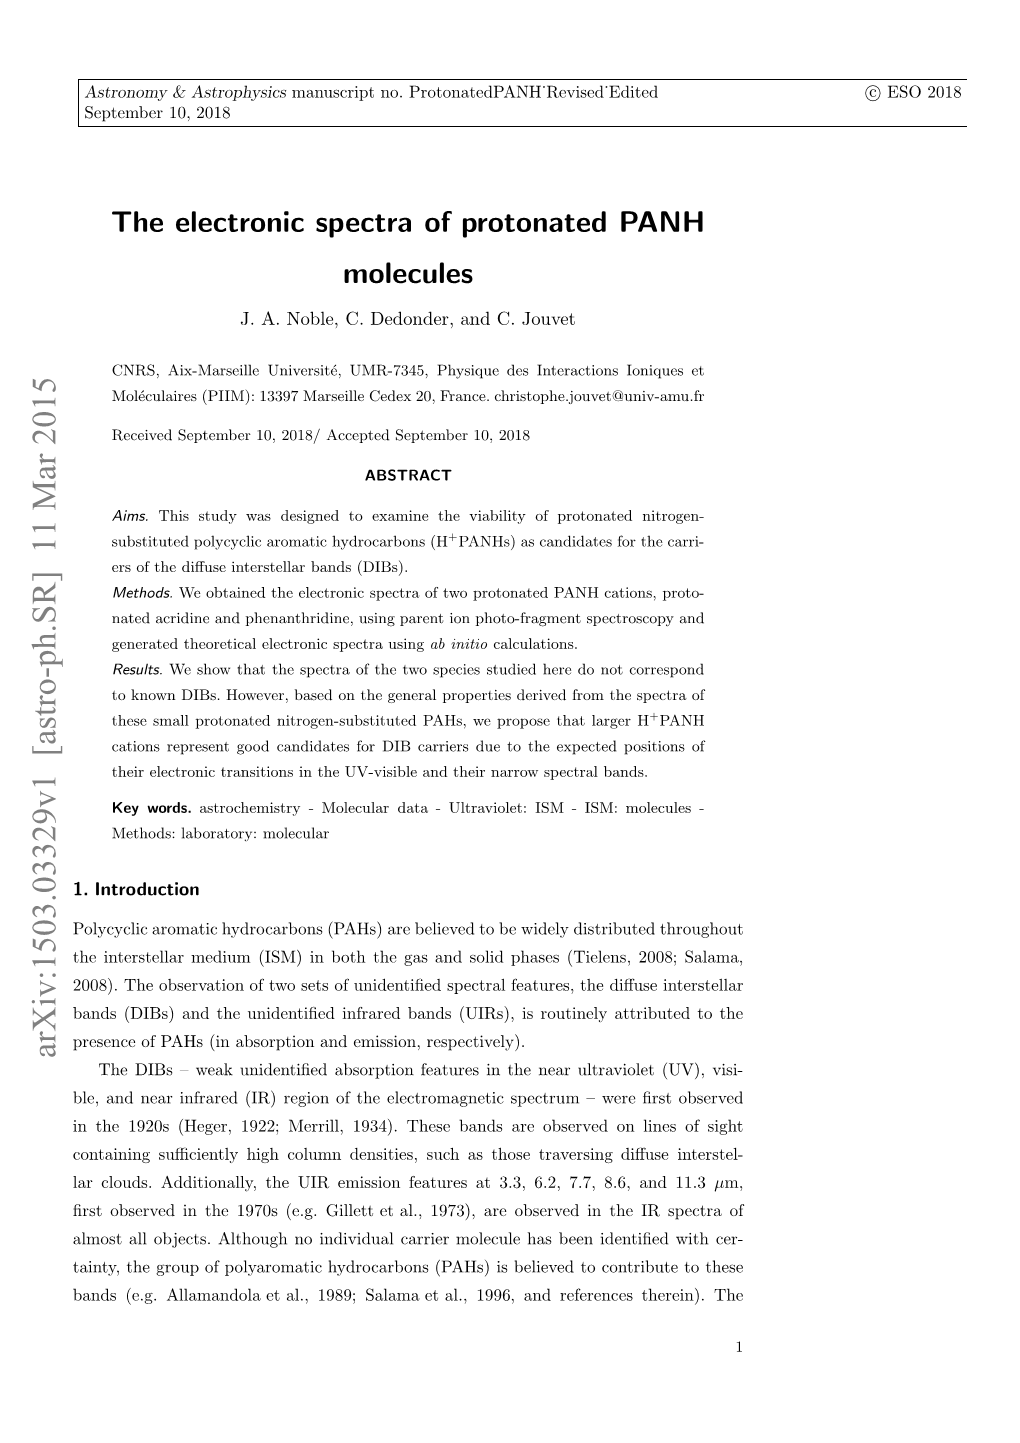 The Electronic Spectra of Protonated PANH Molecules